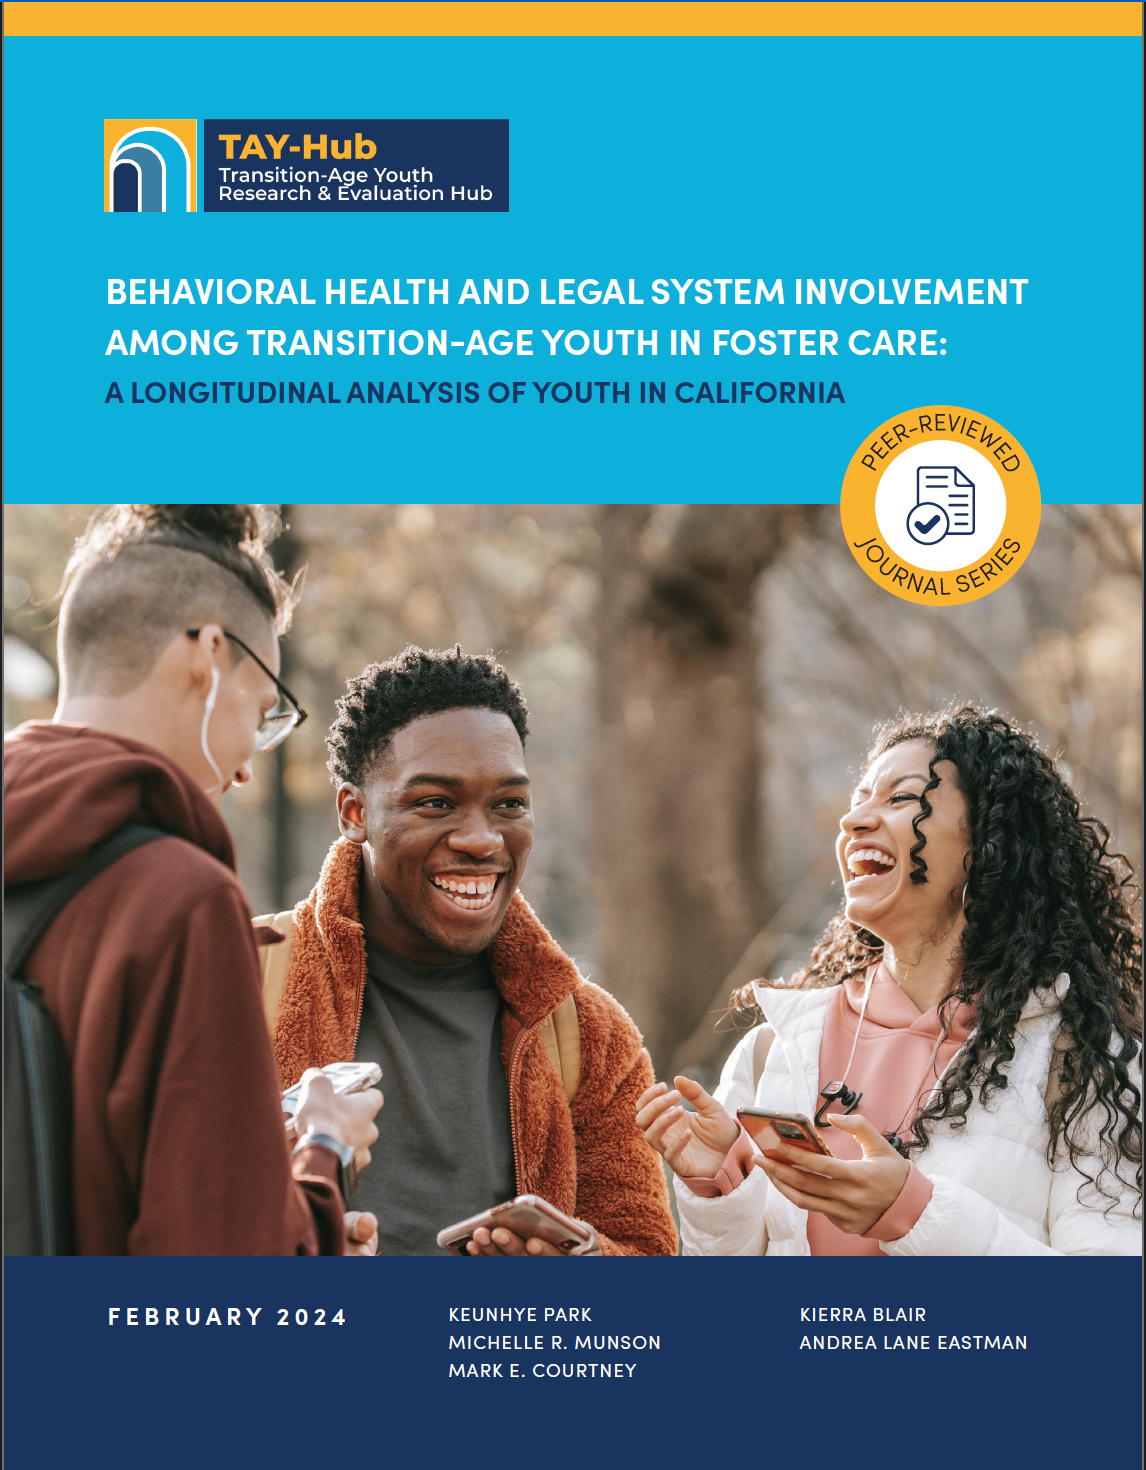 BEHAVIORAL HEALTH AND LEGAL SYSTEM INVOLVEMENT AMONG TRANSITION-AGE YOUTH IN FOSTER CARE: A LONGITUDINAL ANALYSIS OF YOUTH IN CALIFORNIA (PDF)